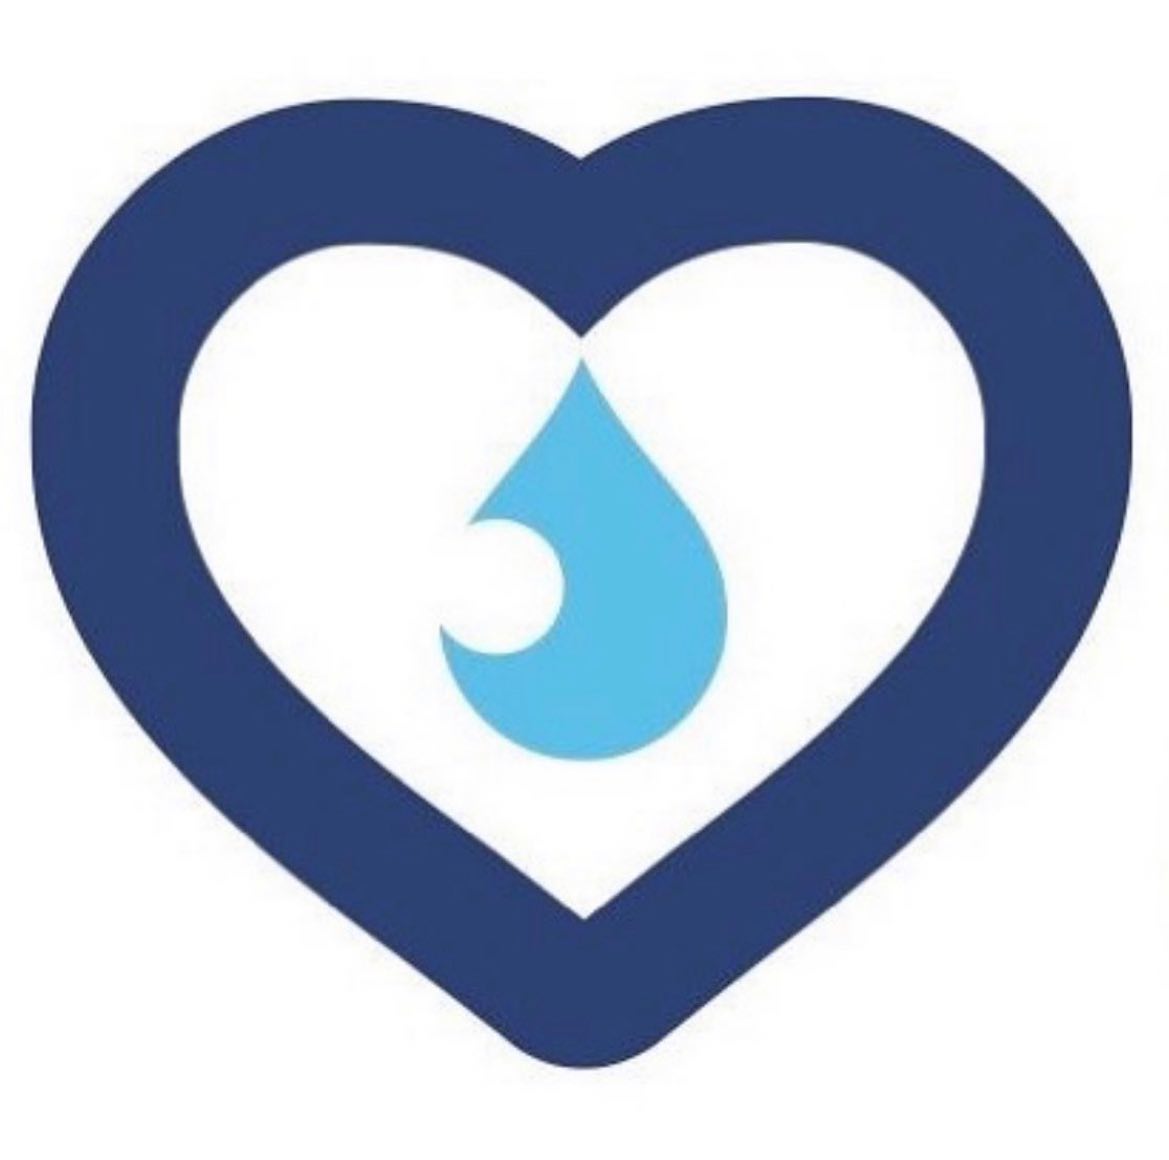 This week’s Charity Tuesday goes to @frank_water_charity who are joining the Peak District Challe...